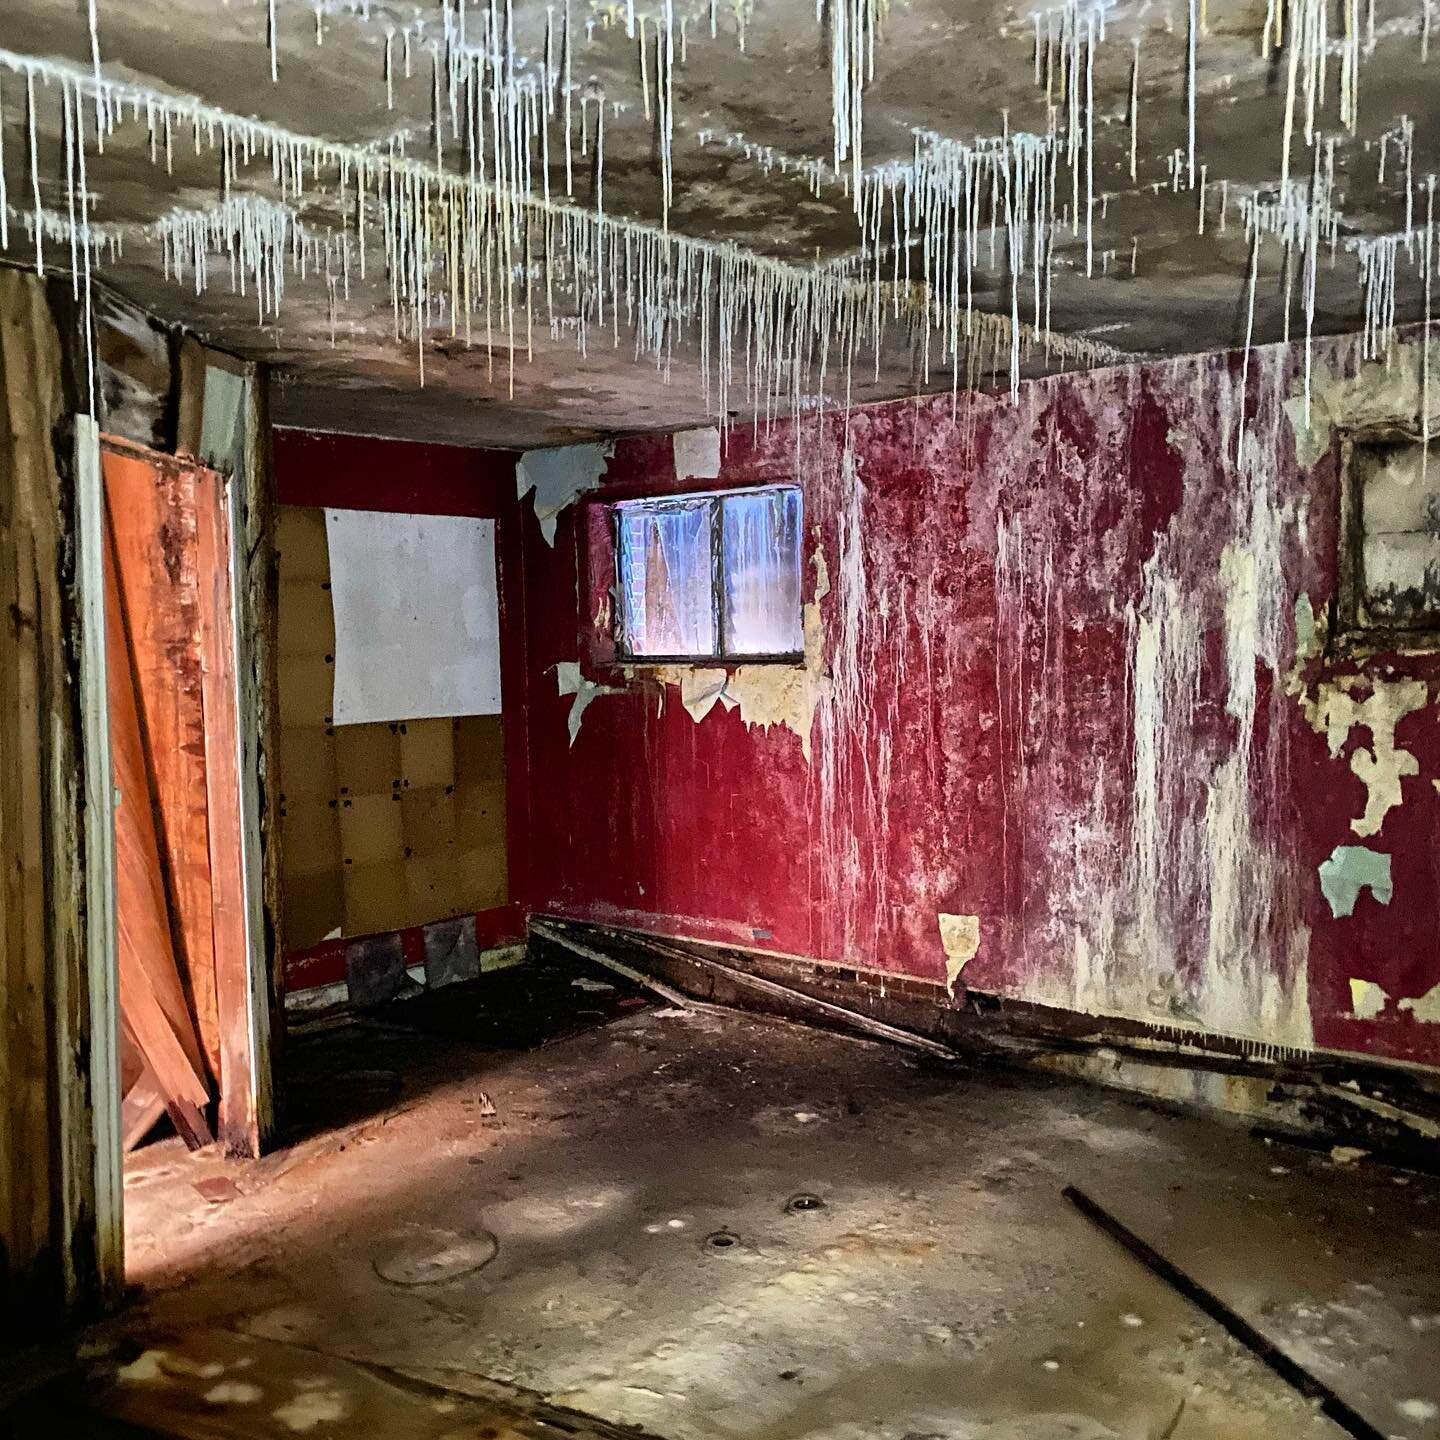 Deferred maintenance of old buildings often creates some of the most interesting spaces!  Unfortunately this one may be beyond repair but check out that ceiling!